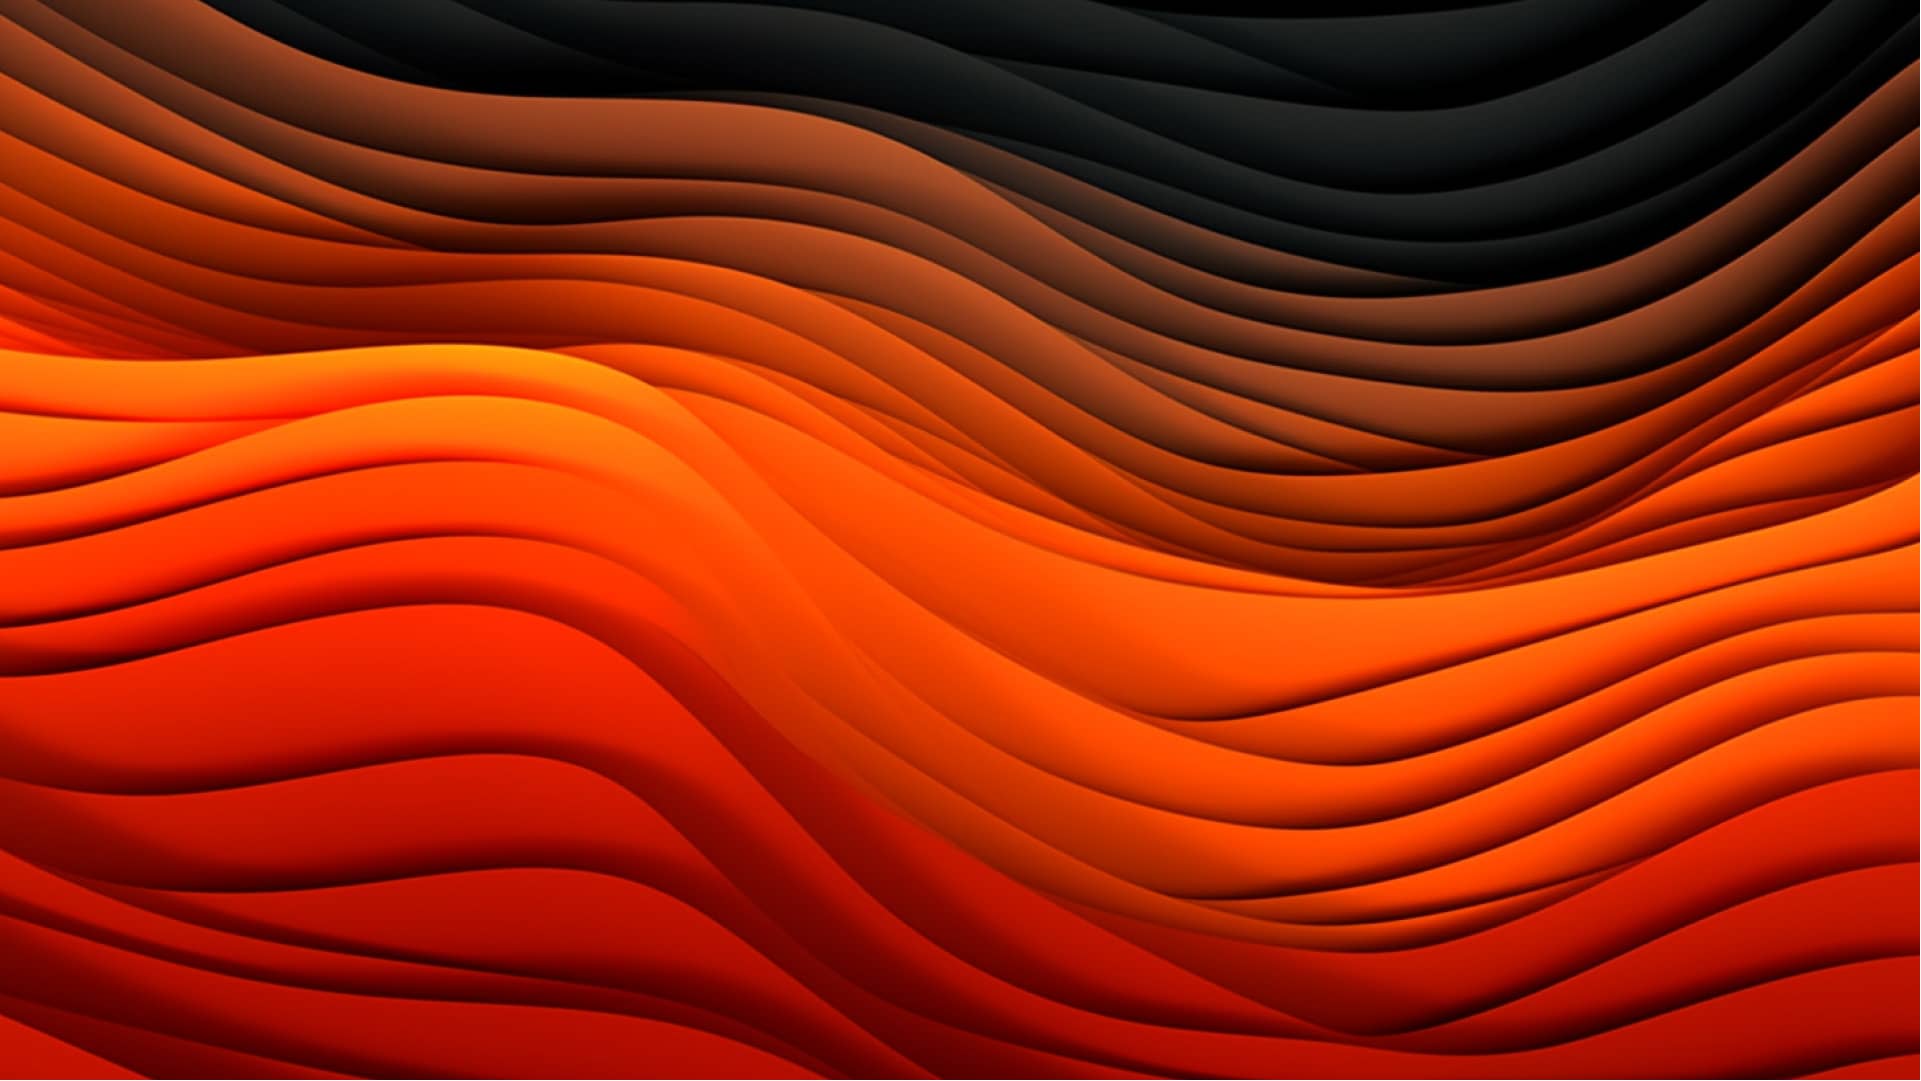 saebender_wave_texture_orange_and_black_gradient_inequal_size_b_e711b3eb-a732-45c4-a982-9a95825db575-1